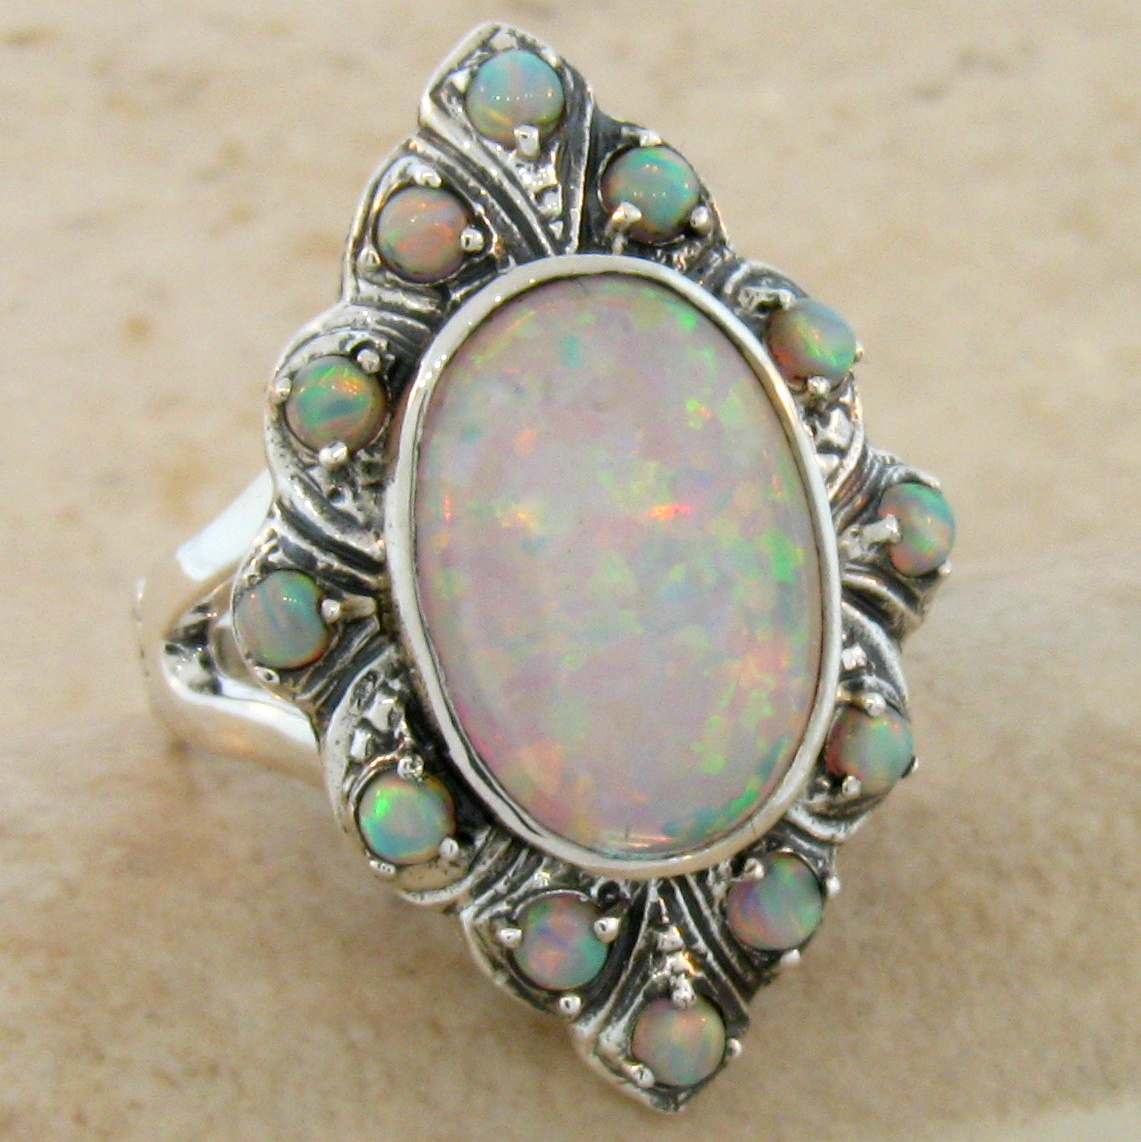 WHITE LAB OPAL ANTIQUE VICTORIAN DESIGN .925 STERLING SILVER RING, #491 ...